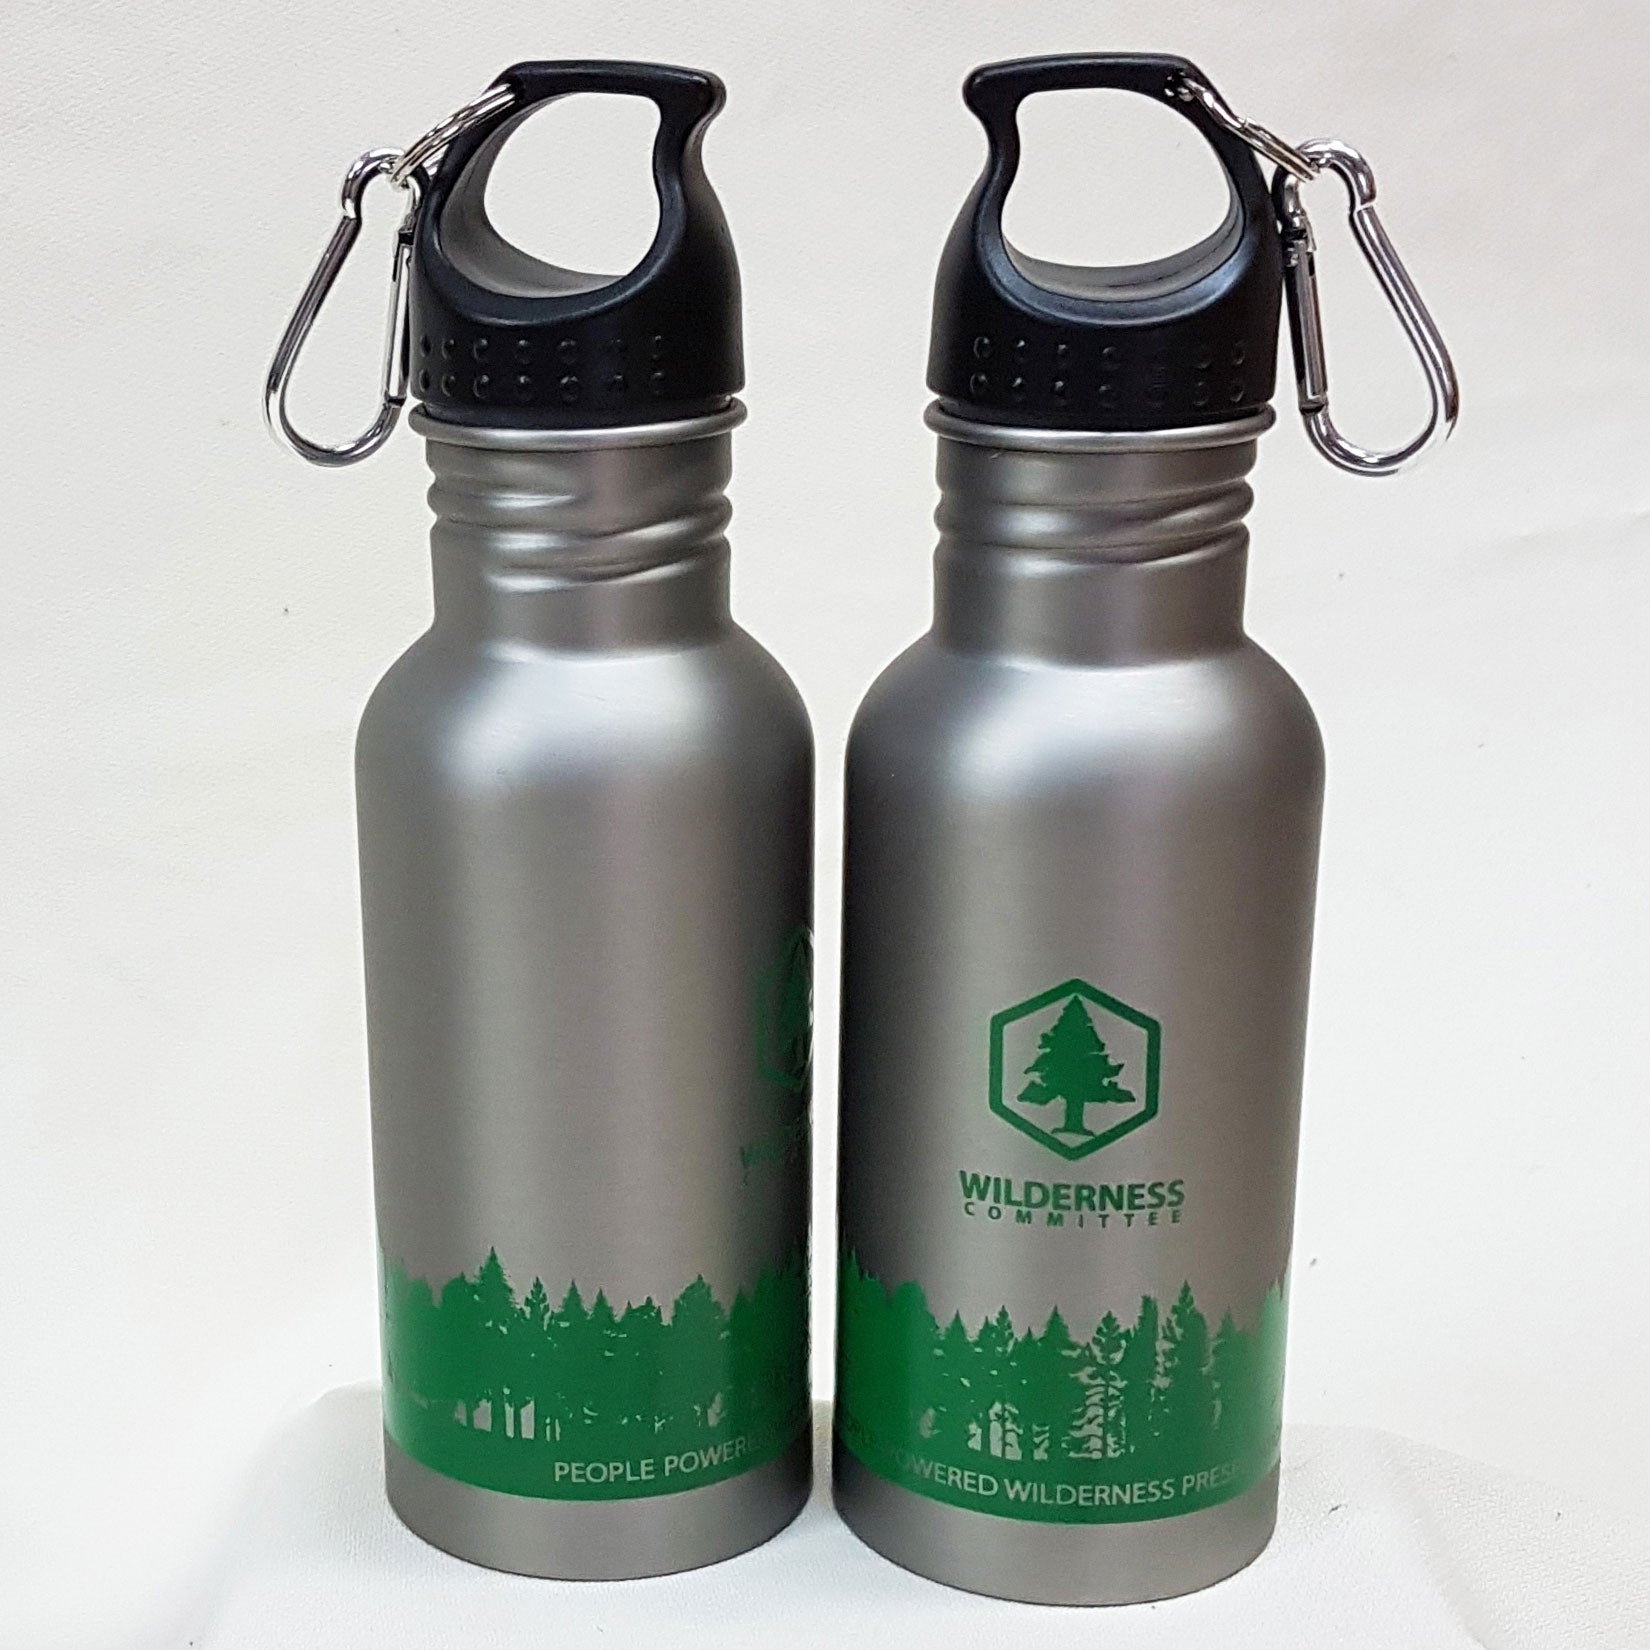 Two reusable tin water bottles with the Wilderness Committee logo. End of image description,